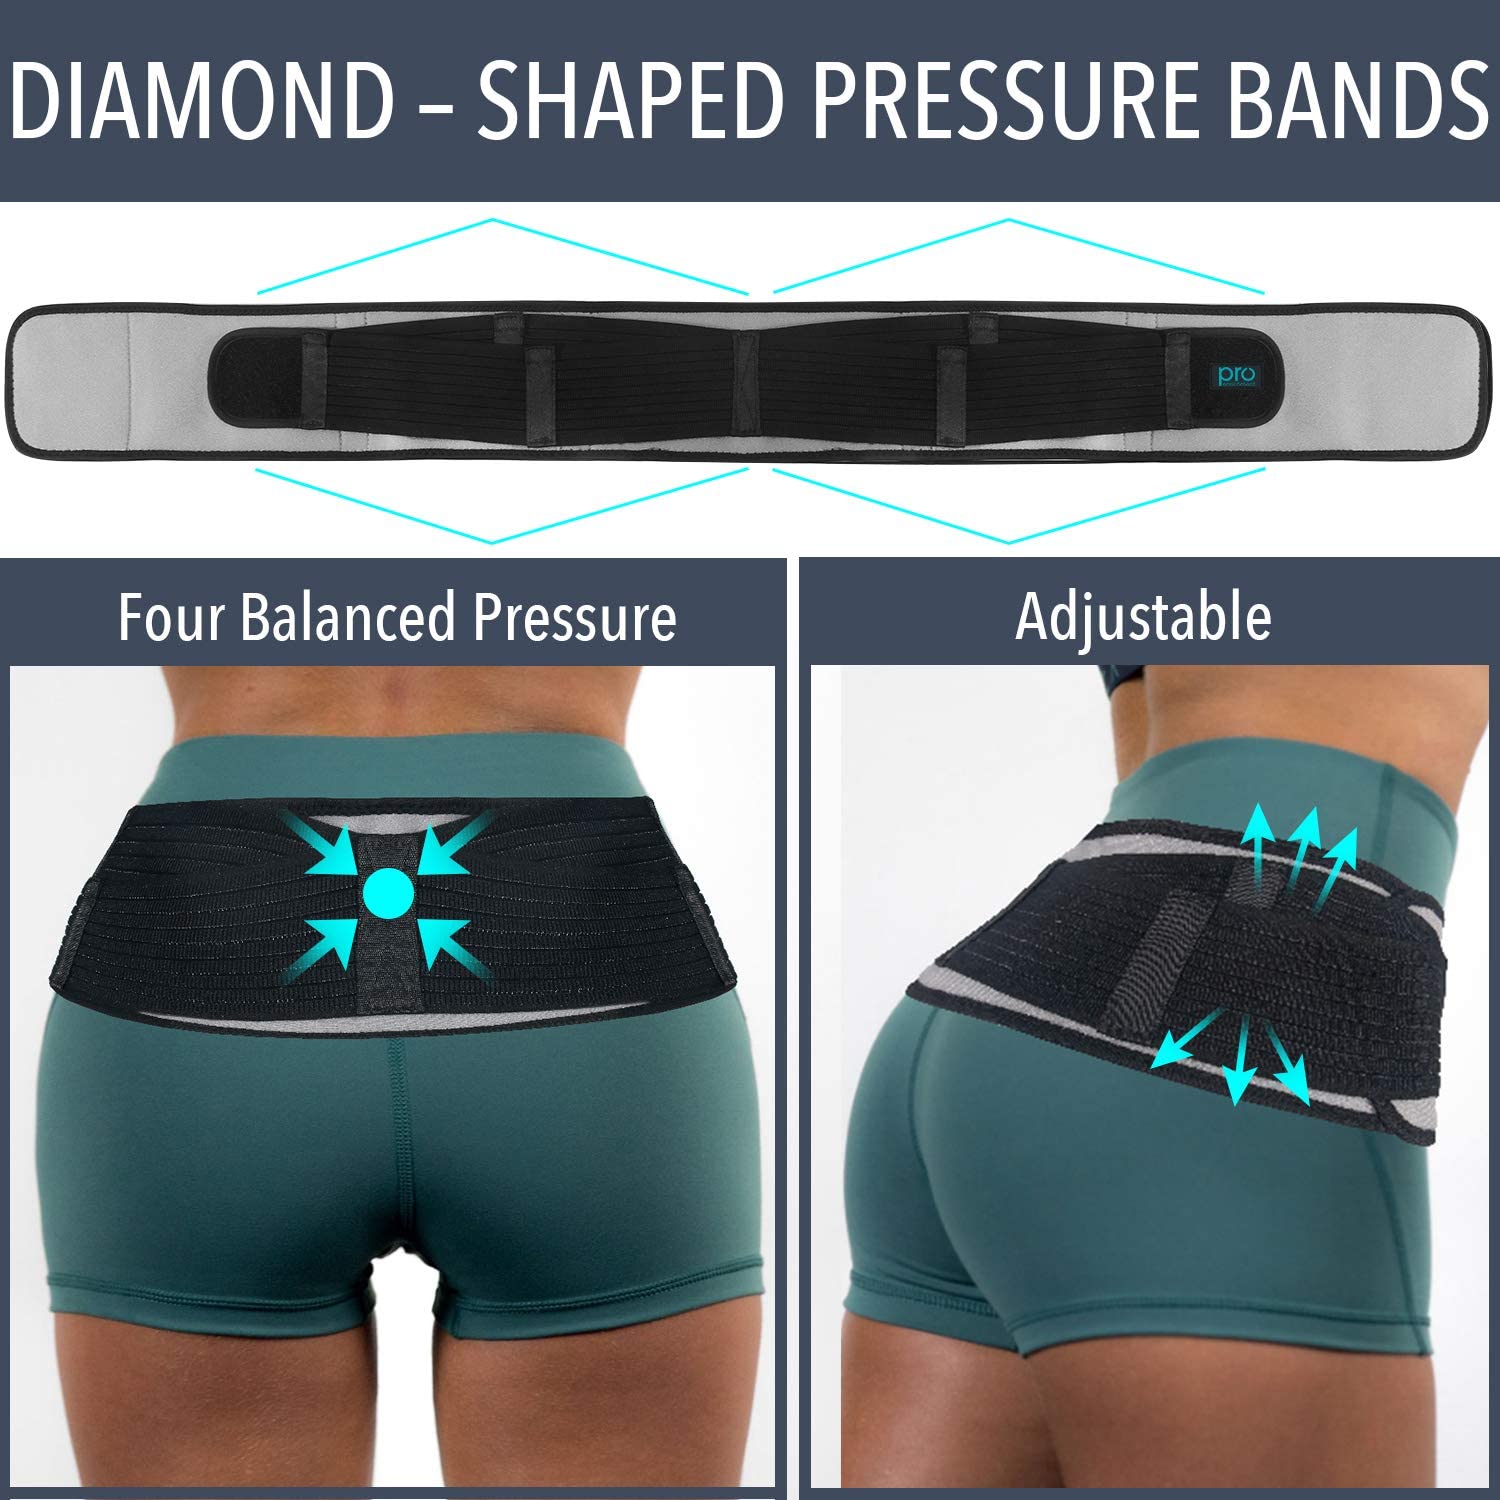  Vriksasana Sacroiliac Hip Belt for Women and Men That  Alleviates Sciatic, Pelvic, Lower Back, Leg and Sacral Nerve Pain Caused by  Si Joint Dysfunction